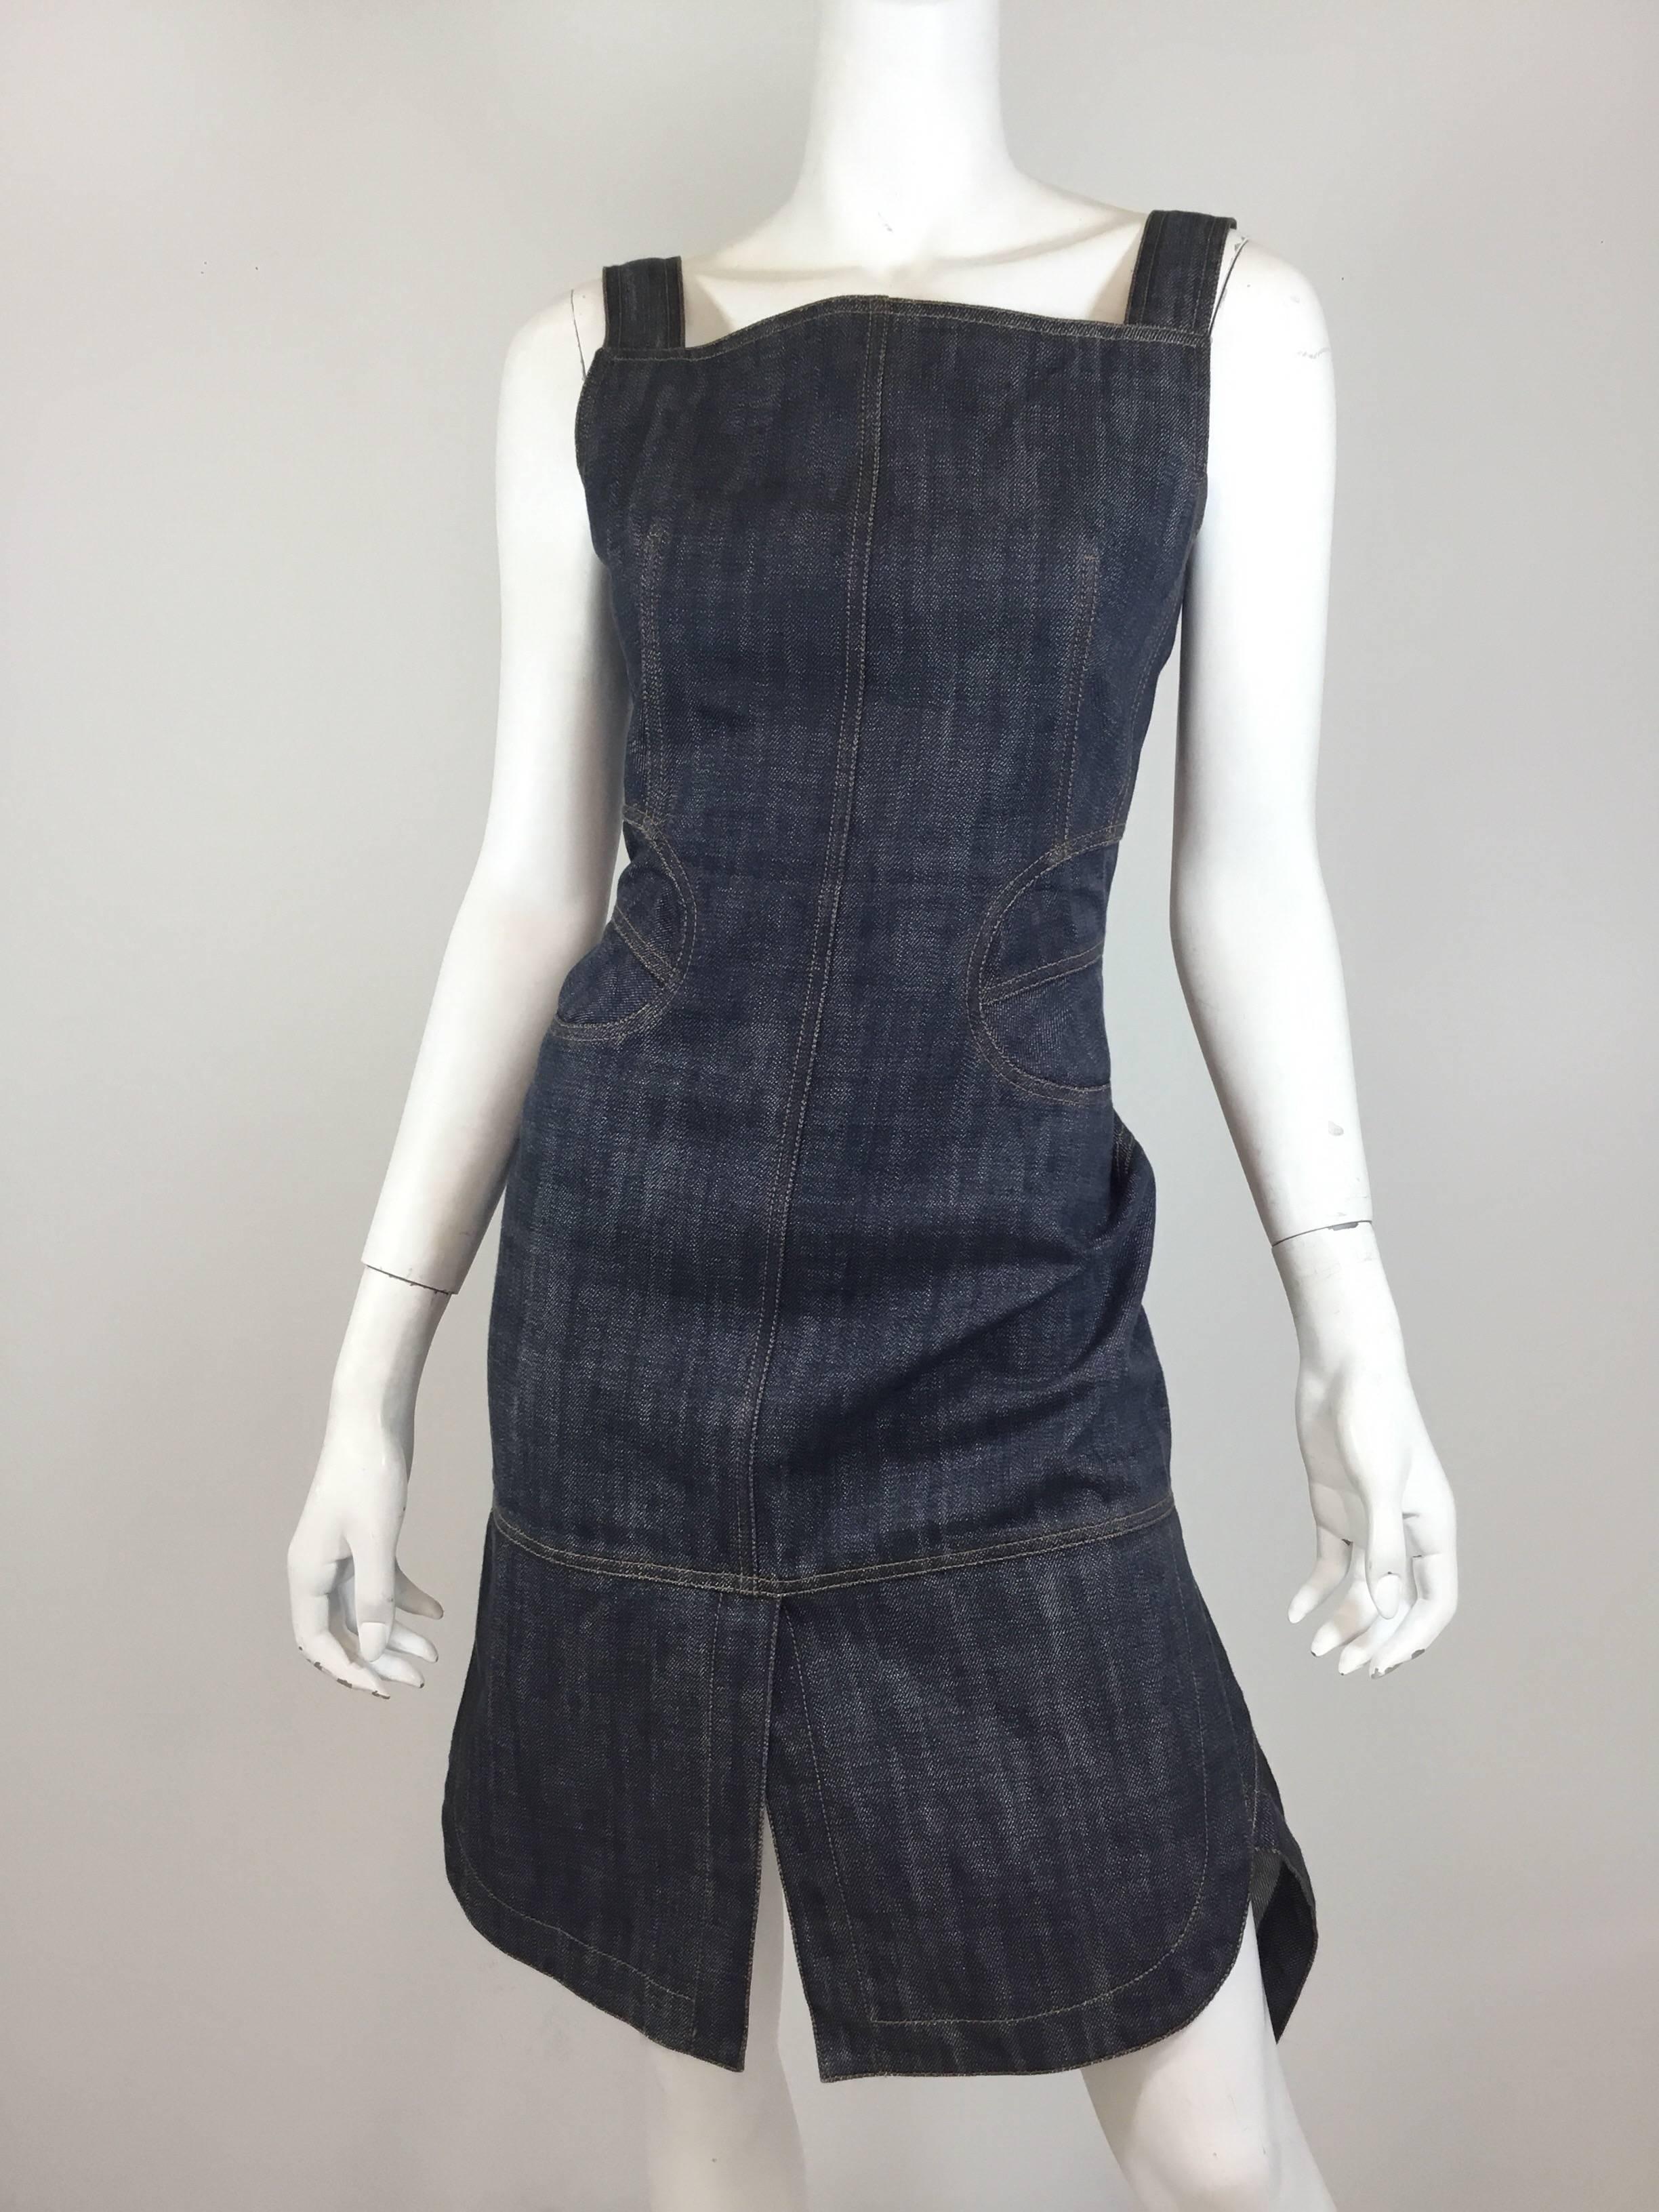 Alaia denim dress features a square neckline, flared hem, and a back zipper fastening. Slight stretch to the fabric. Spotted on the real housewives. Dress is in excellent condition!

Bust 34'', waist 28'', hips 34'', length 31''